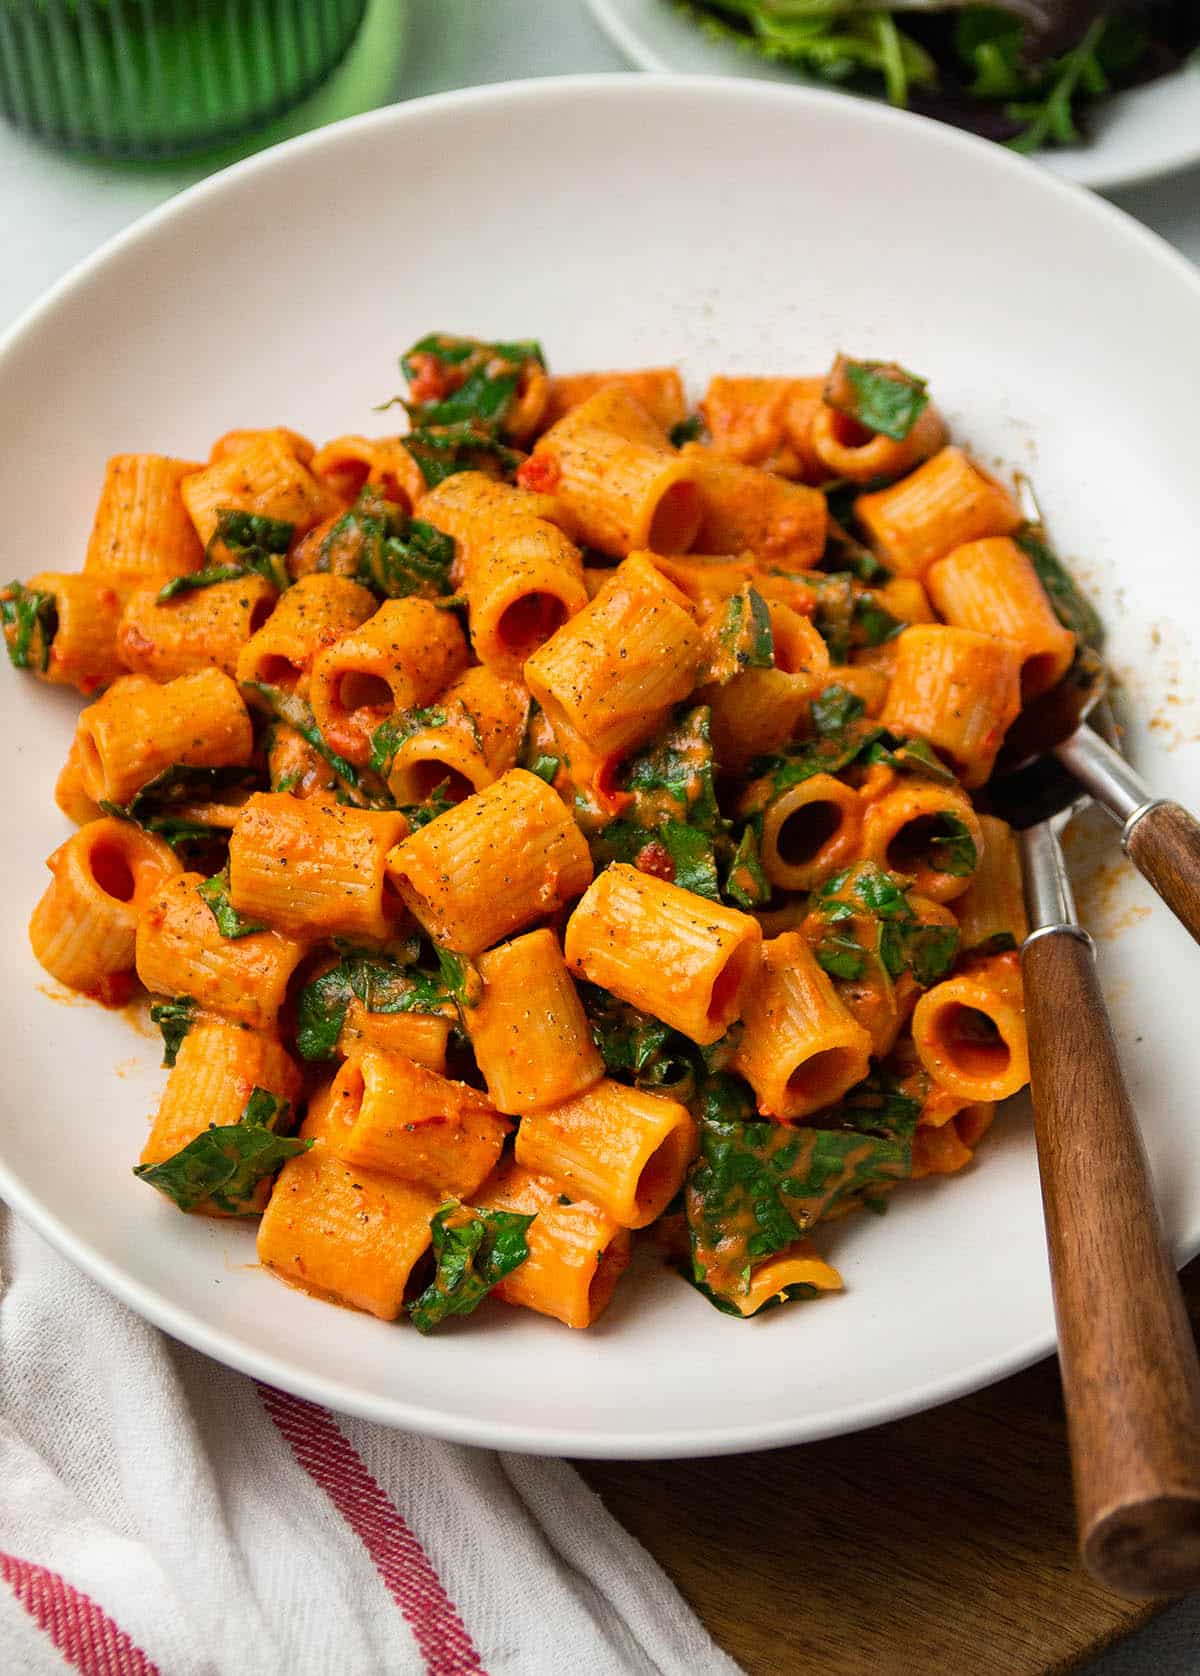 Harissa pasta in a shallow white bowl.